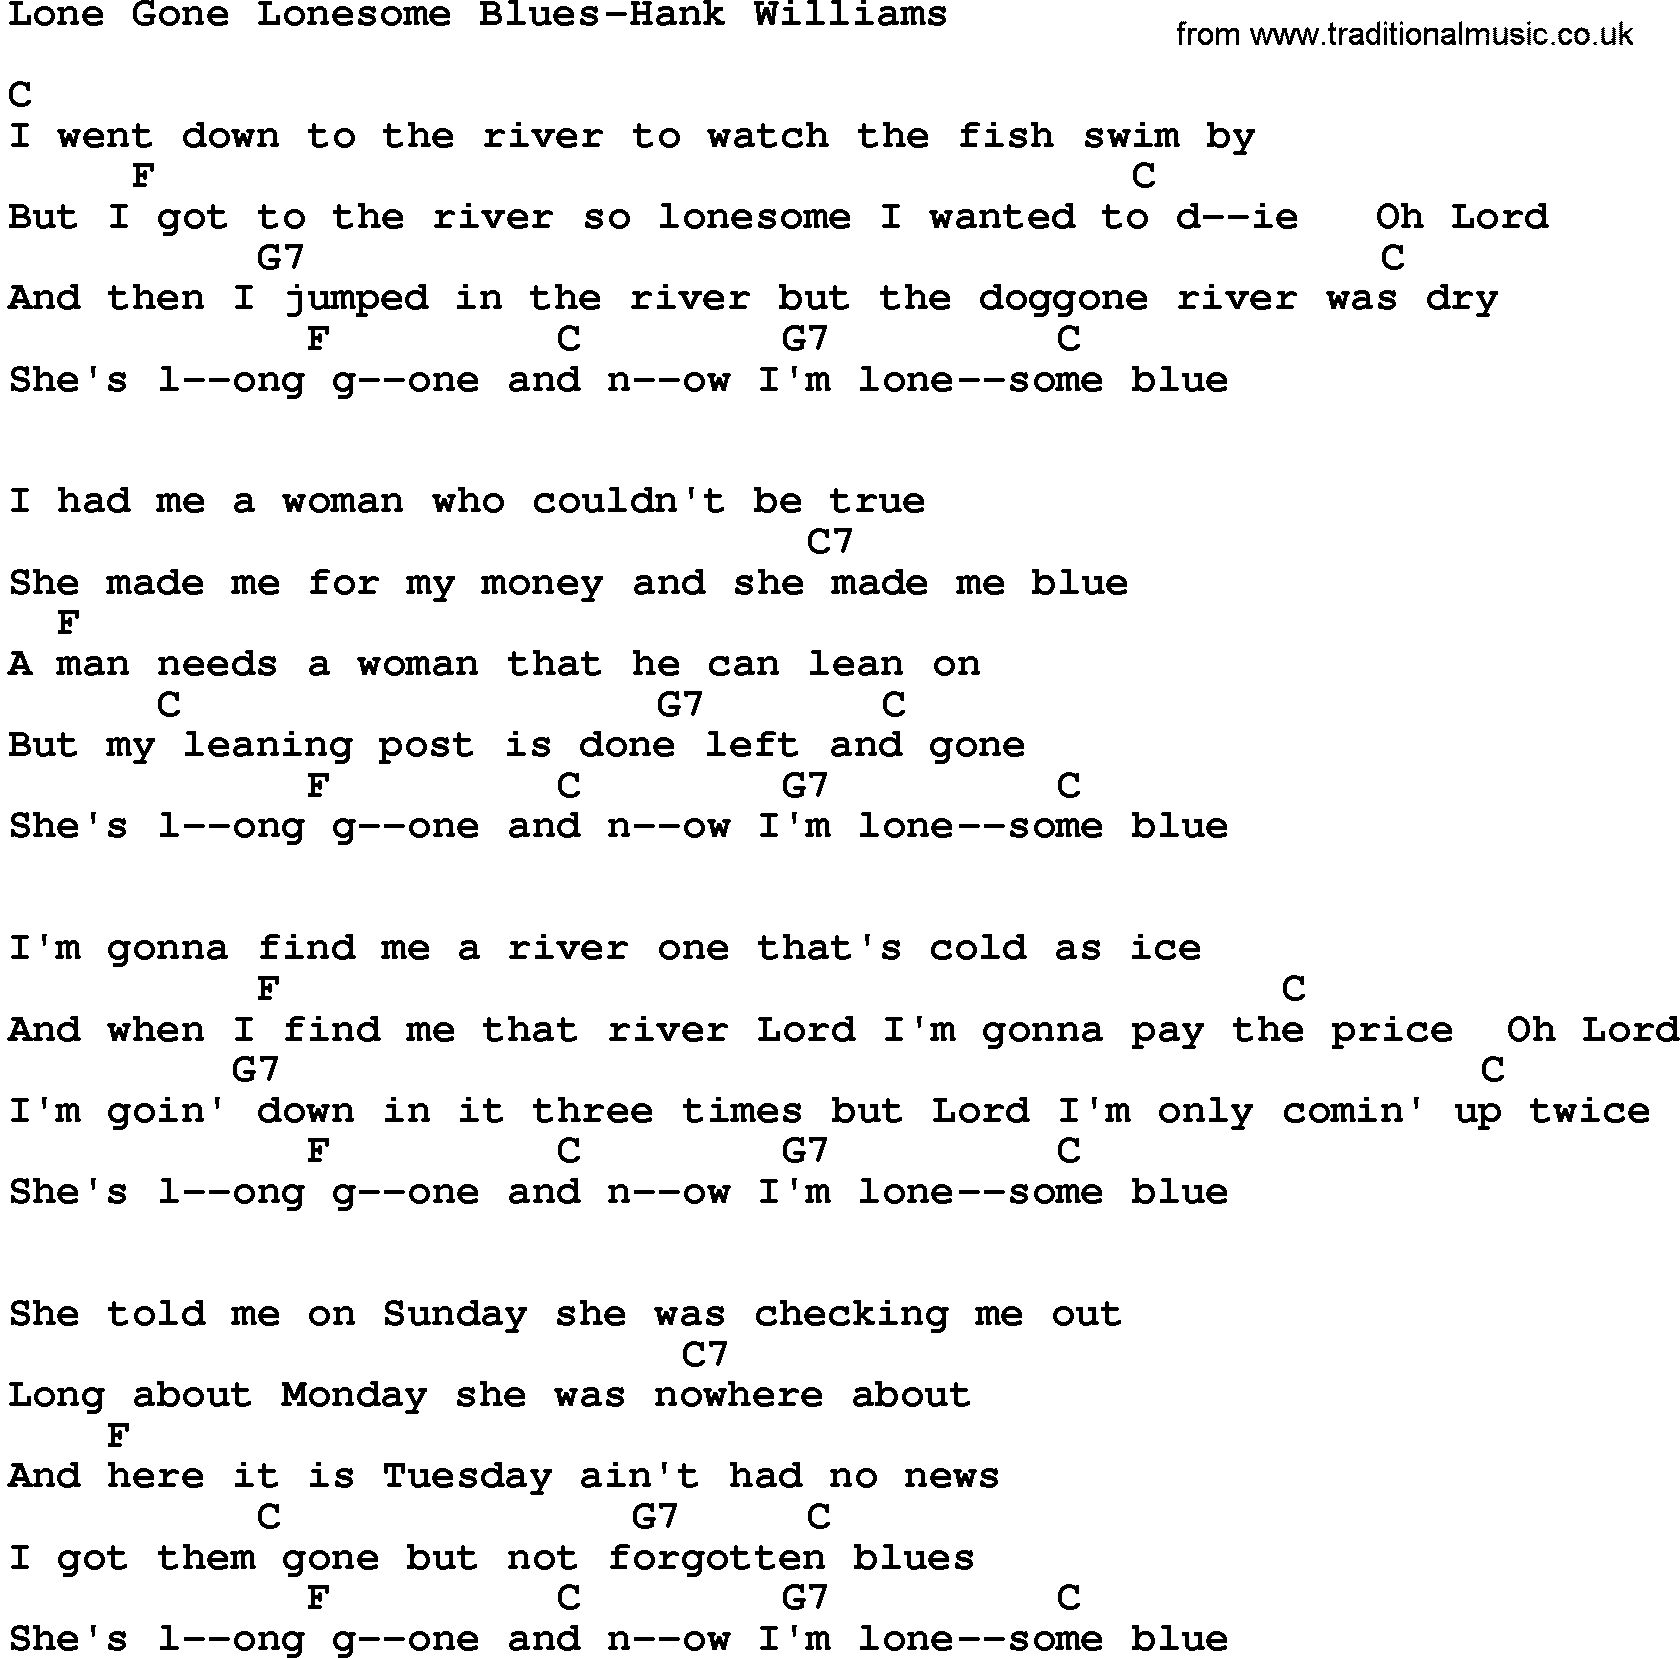 Country music song: Lone Gone Lonesome Blues-Hank Williams lyrics and chords